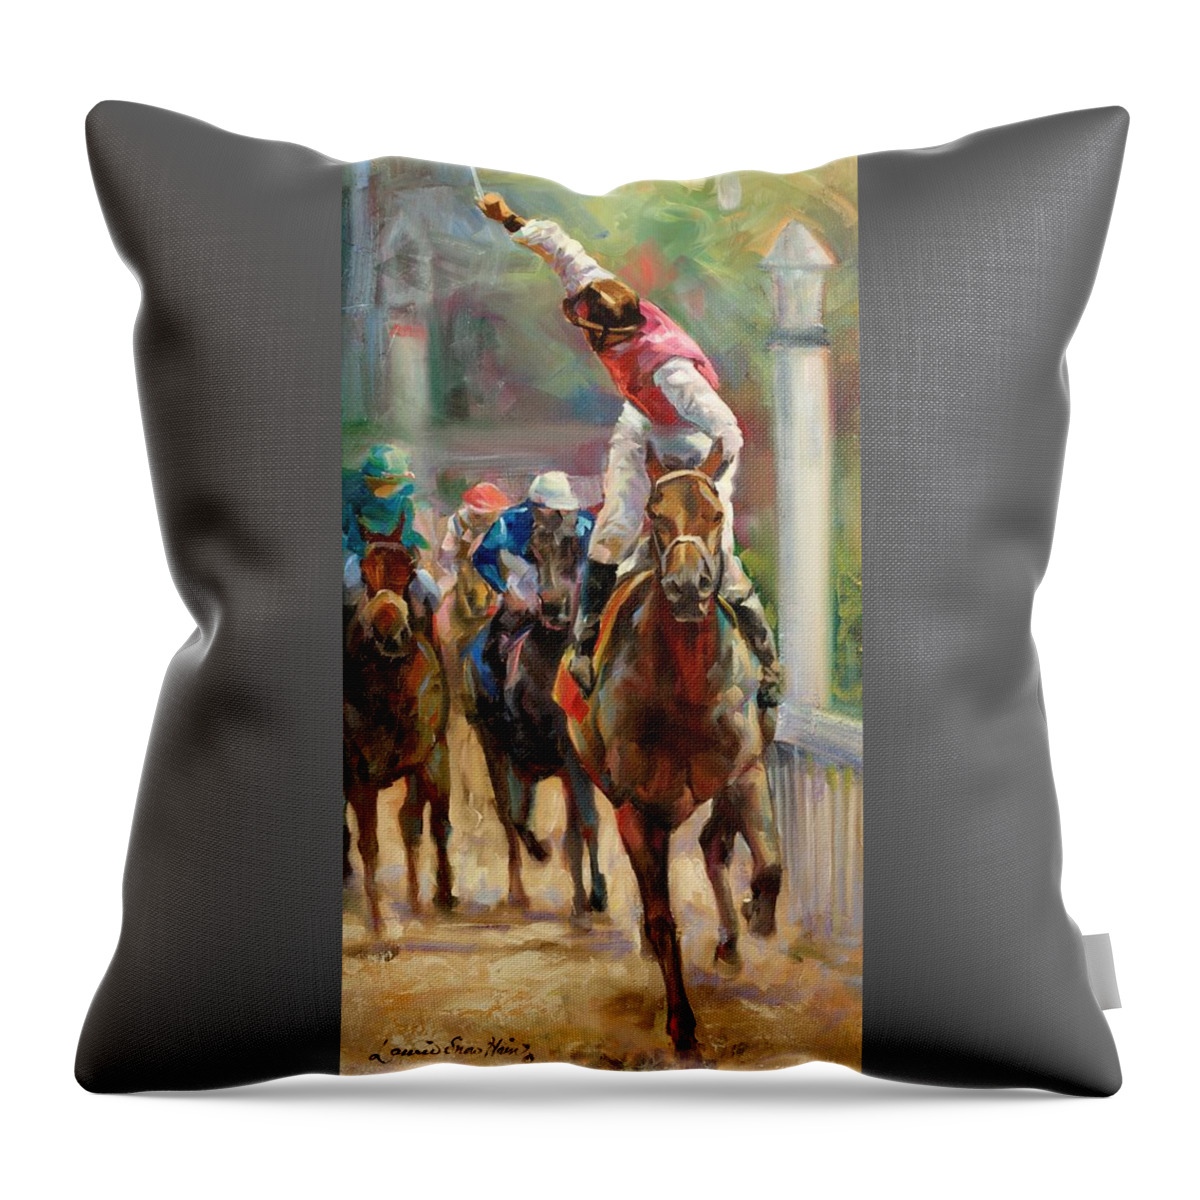 Horses Throw Pillow featuring the painting Over The Line by Laurie Snow Hein